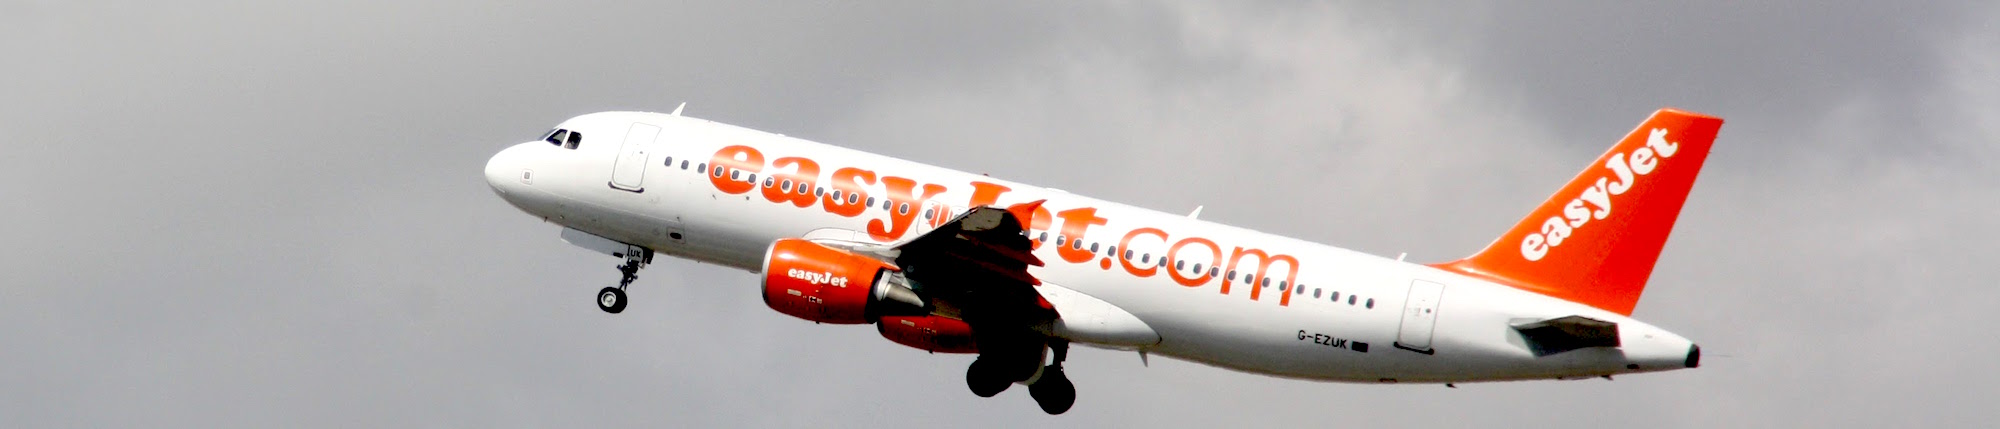 Best time to book flights for Amsterdam (AMS) to Birmingham (BHX) flights with EasyJet at AirHint